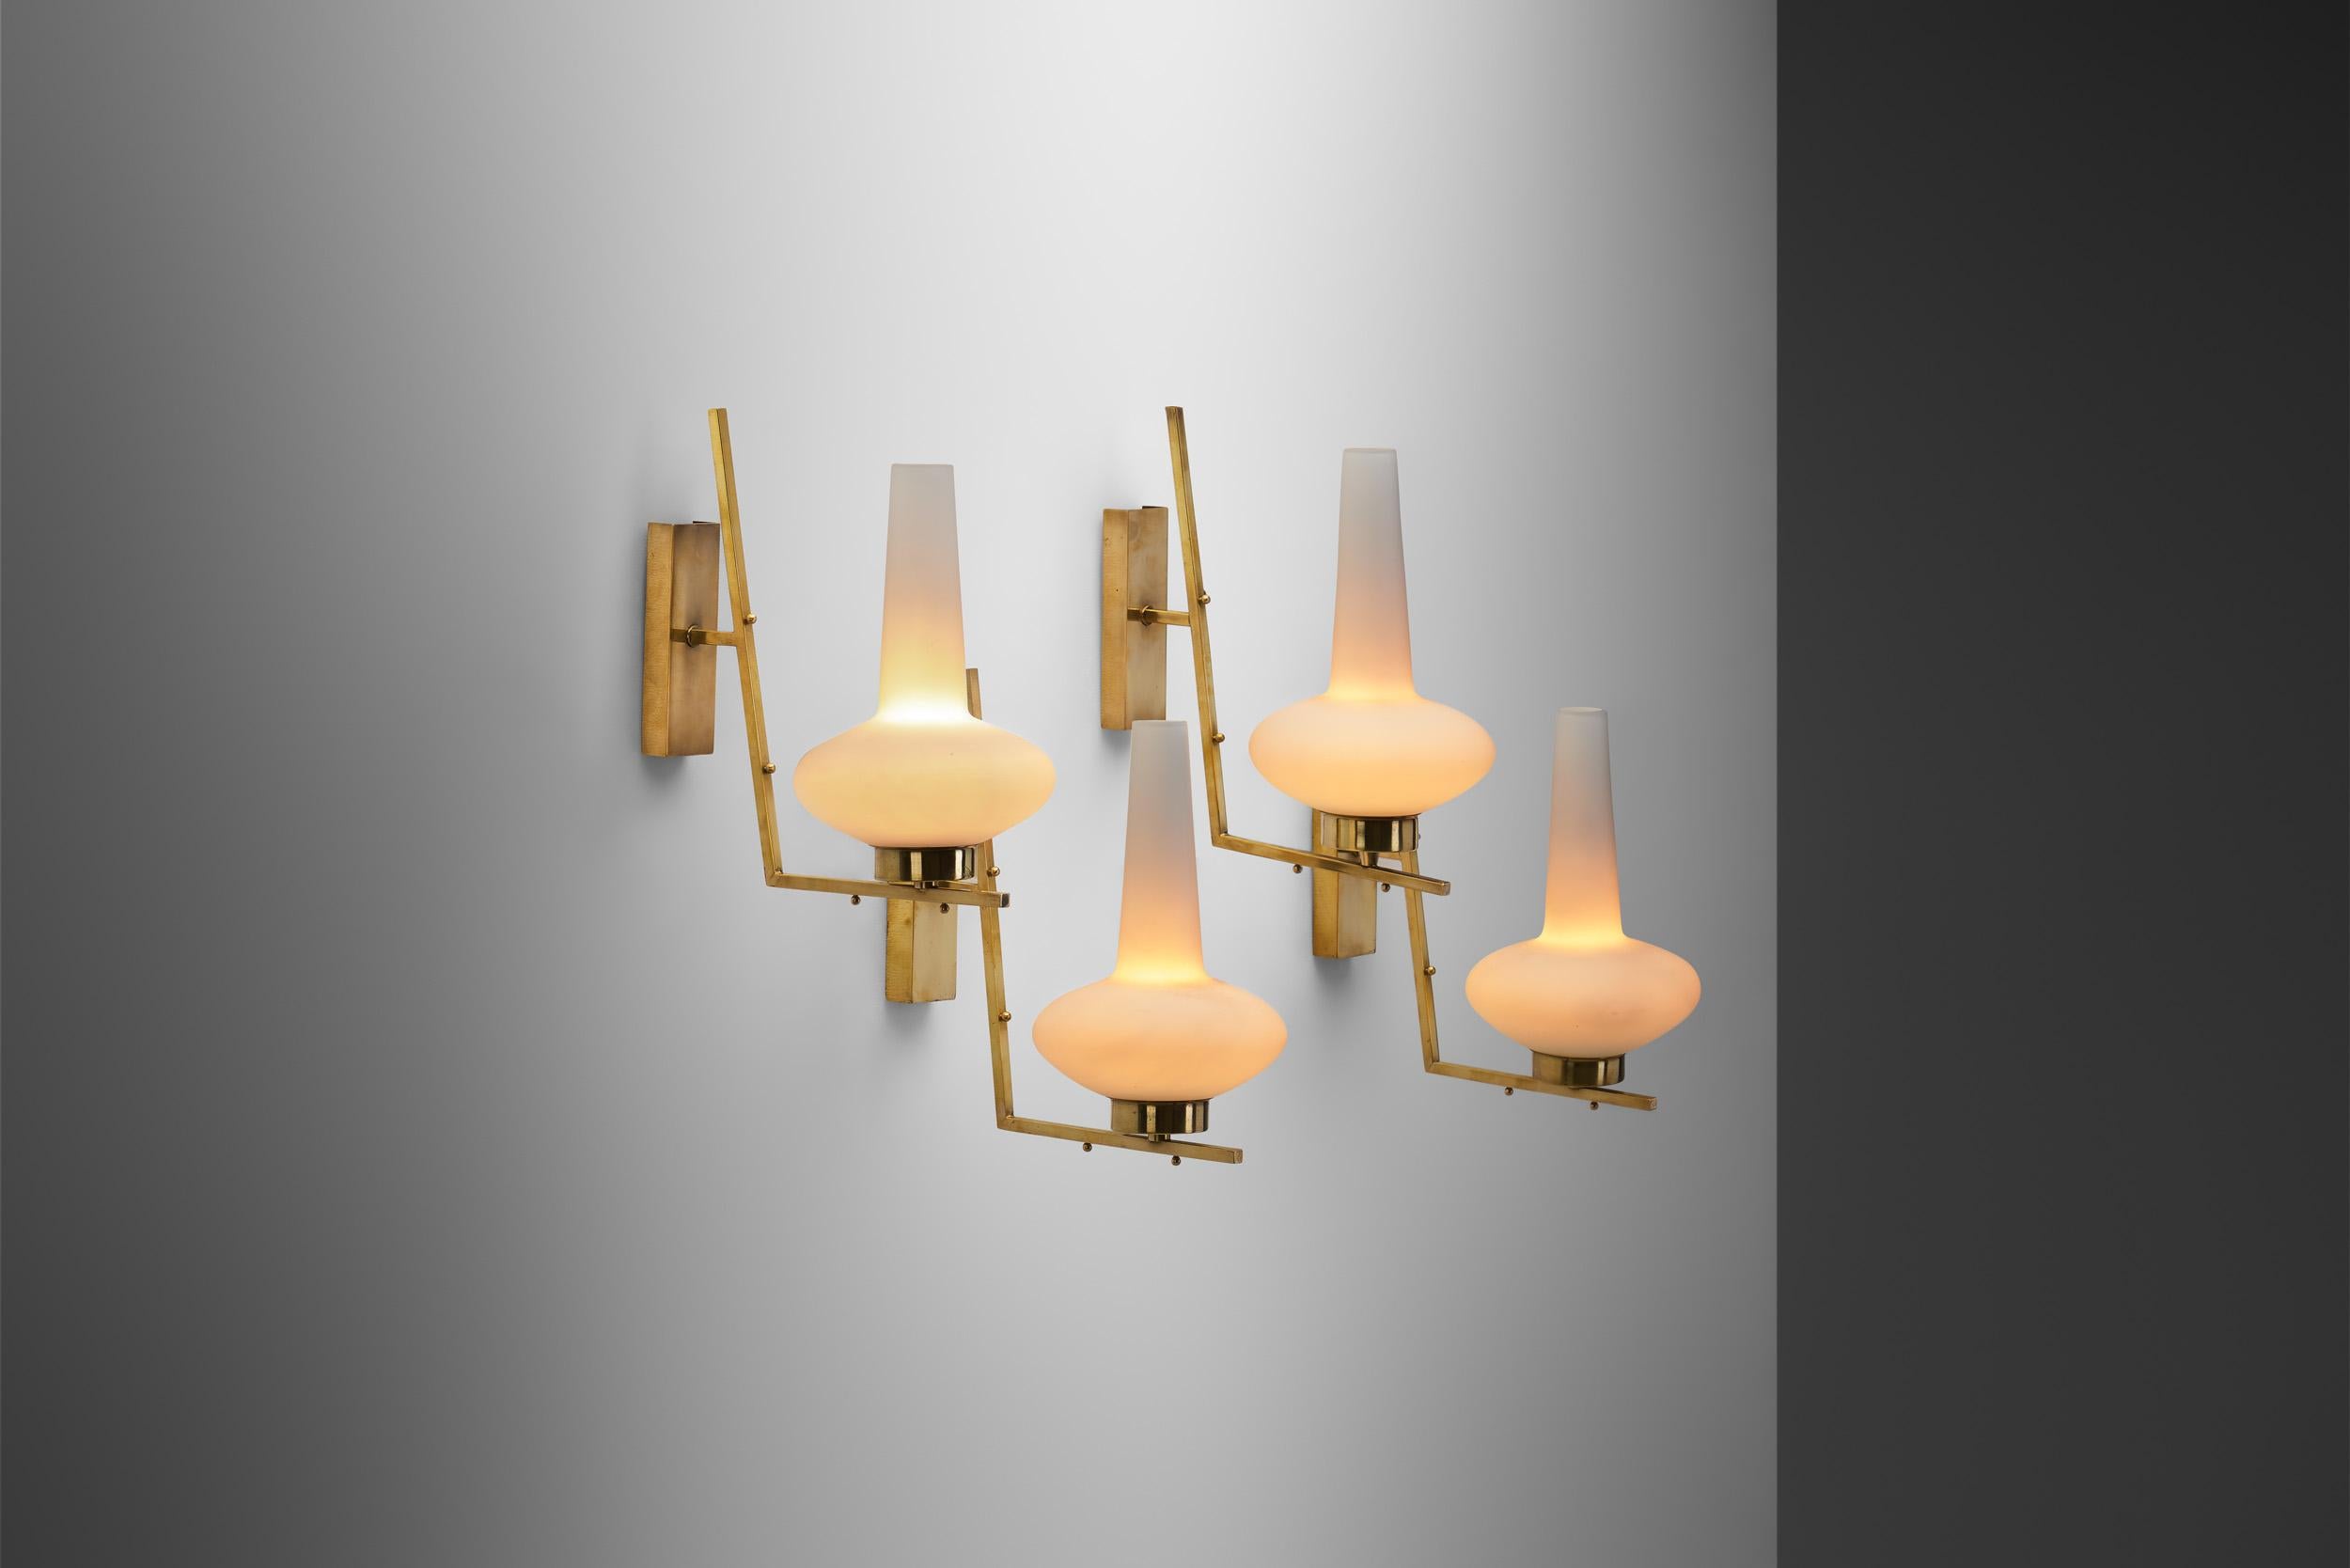 Mid-20th Century Italian Mid-Century Modern Brass Wall Lamps, Italy 1950s For Sale